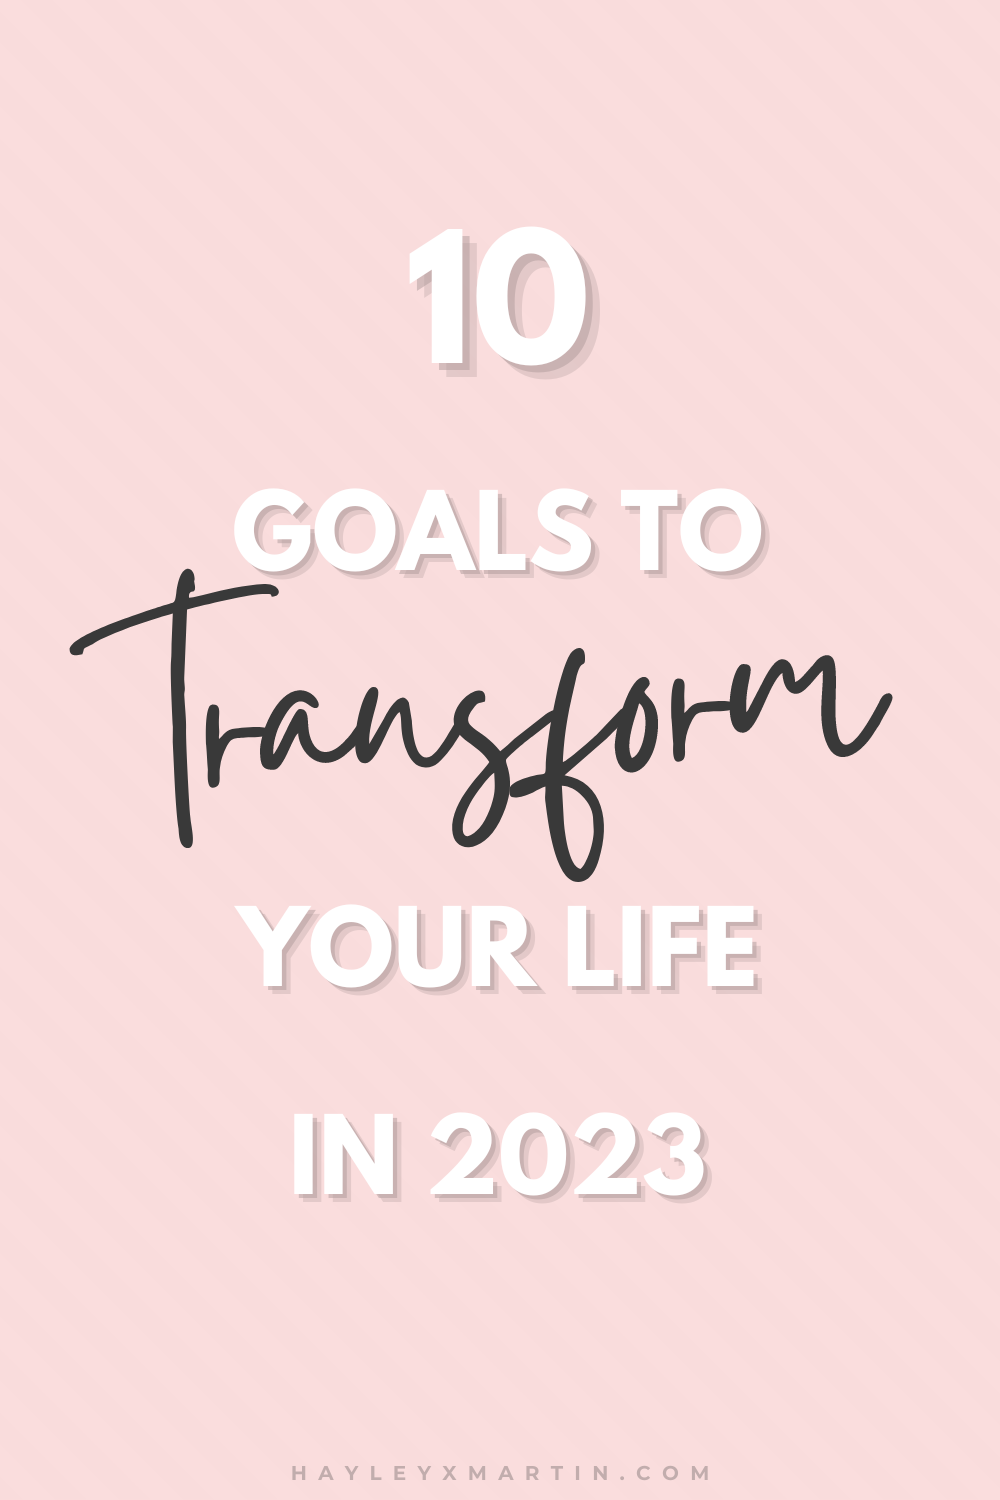 10 Goals to transform your life in 2023